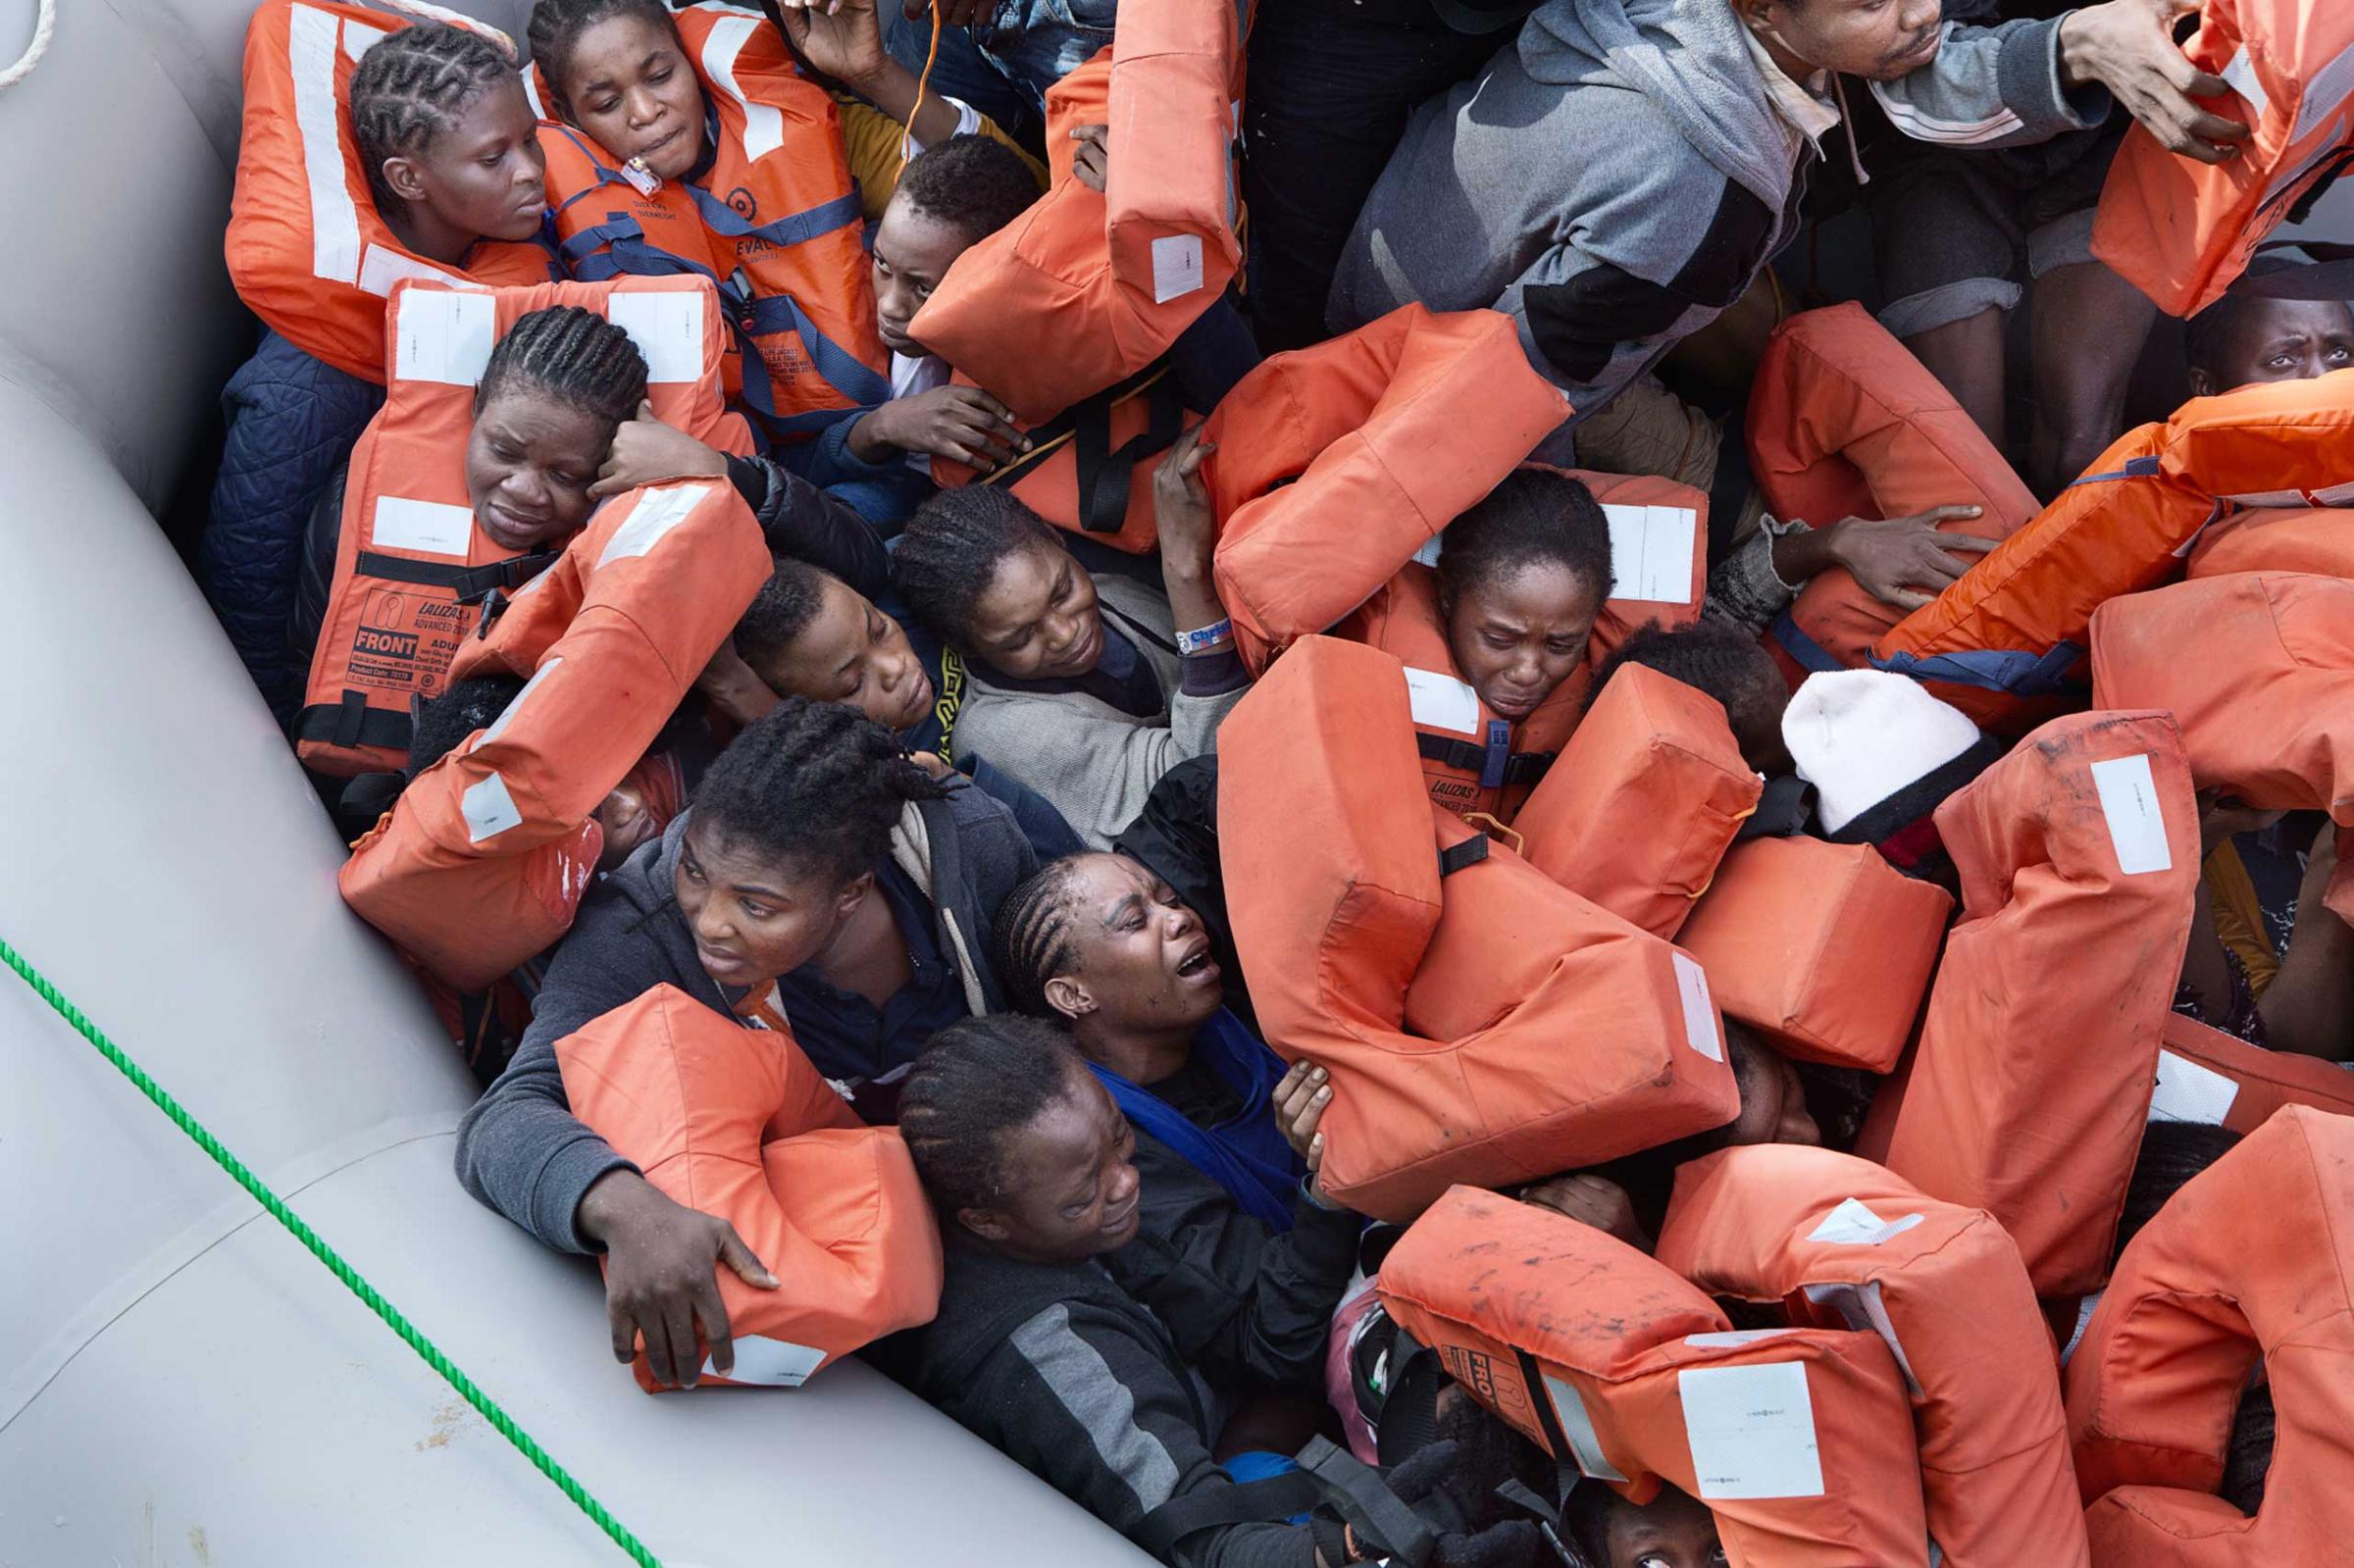 African migrants are rescued from their dinghy by MSF. The ship Bourbon Argos was patrolling the waters off Libya when it encountered a dinghy carrying 93 migrants of different nationalities, including 31 women.